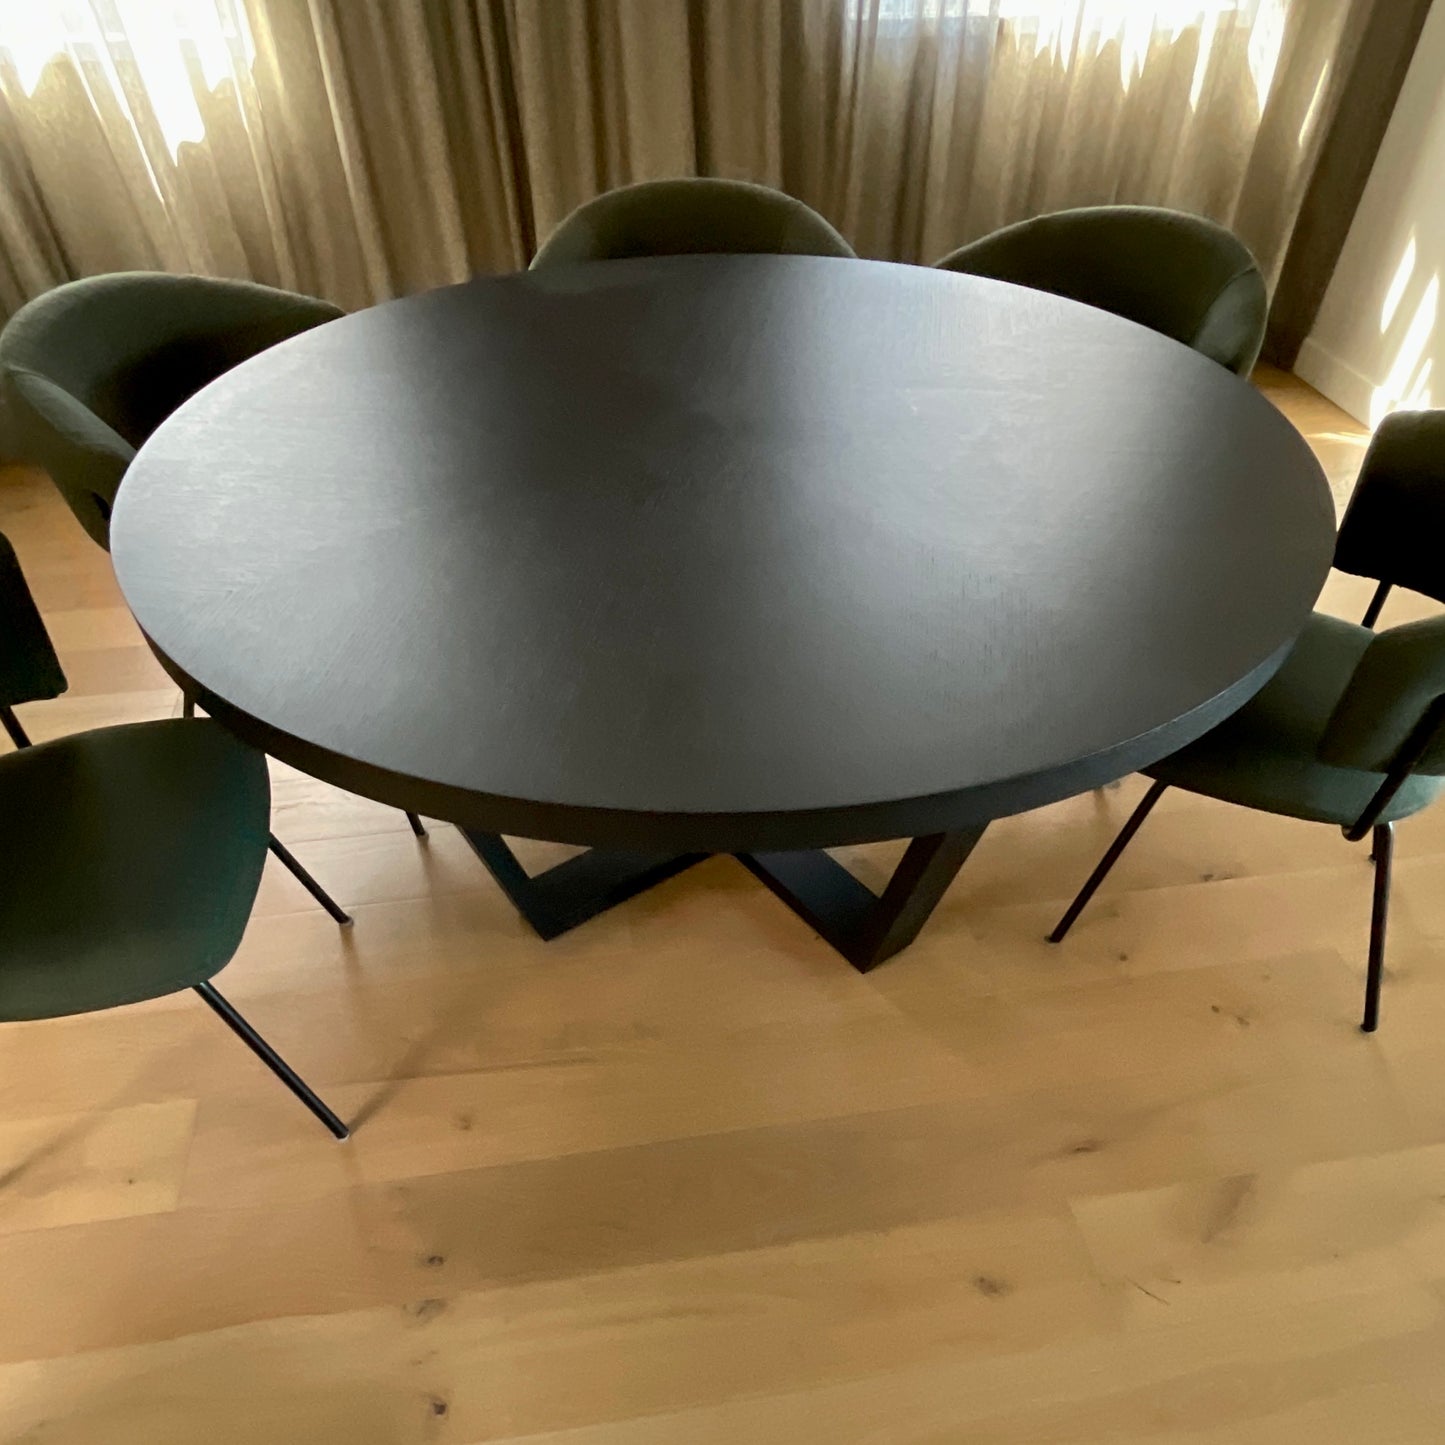 Domo Dining Table by Camerich